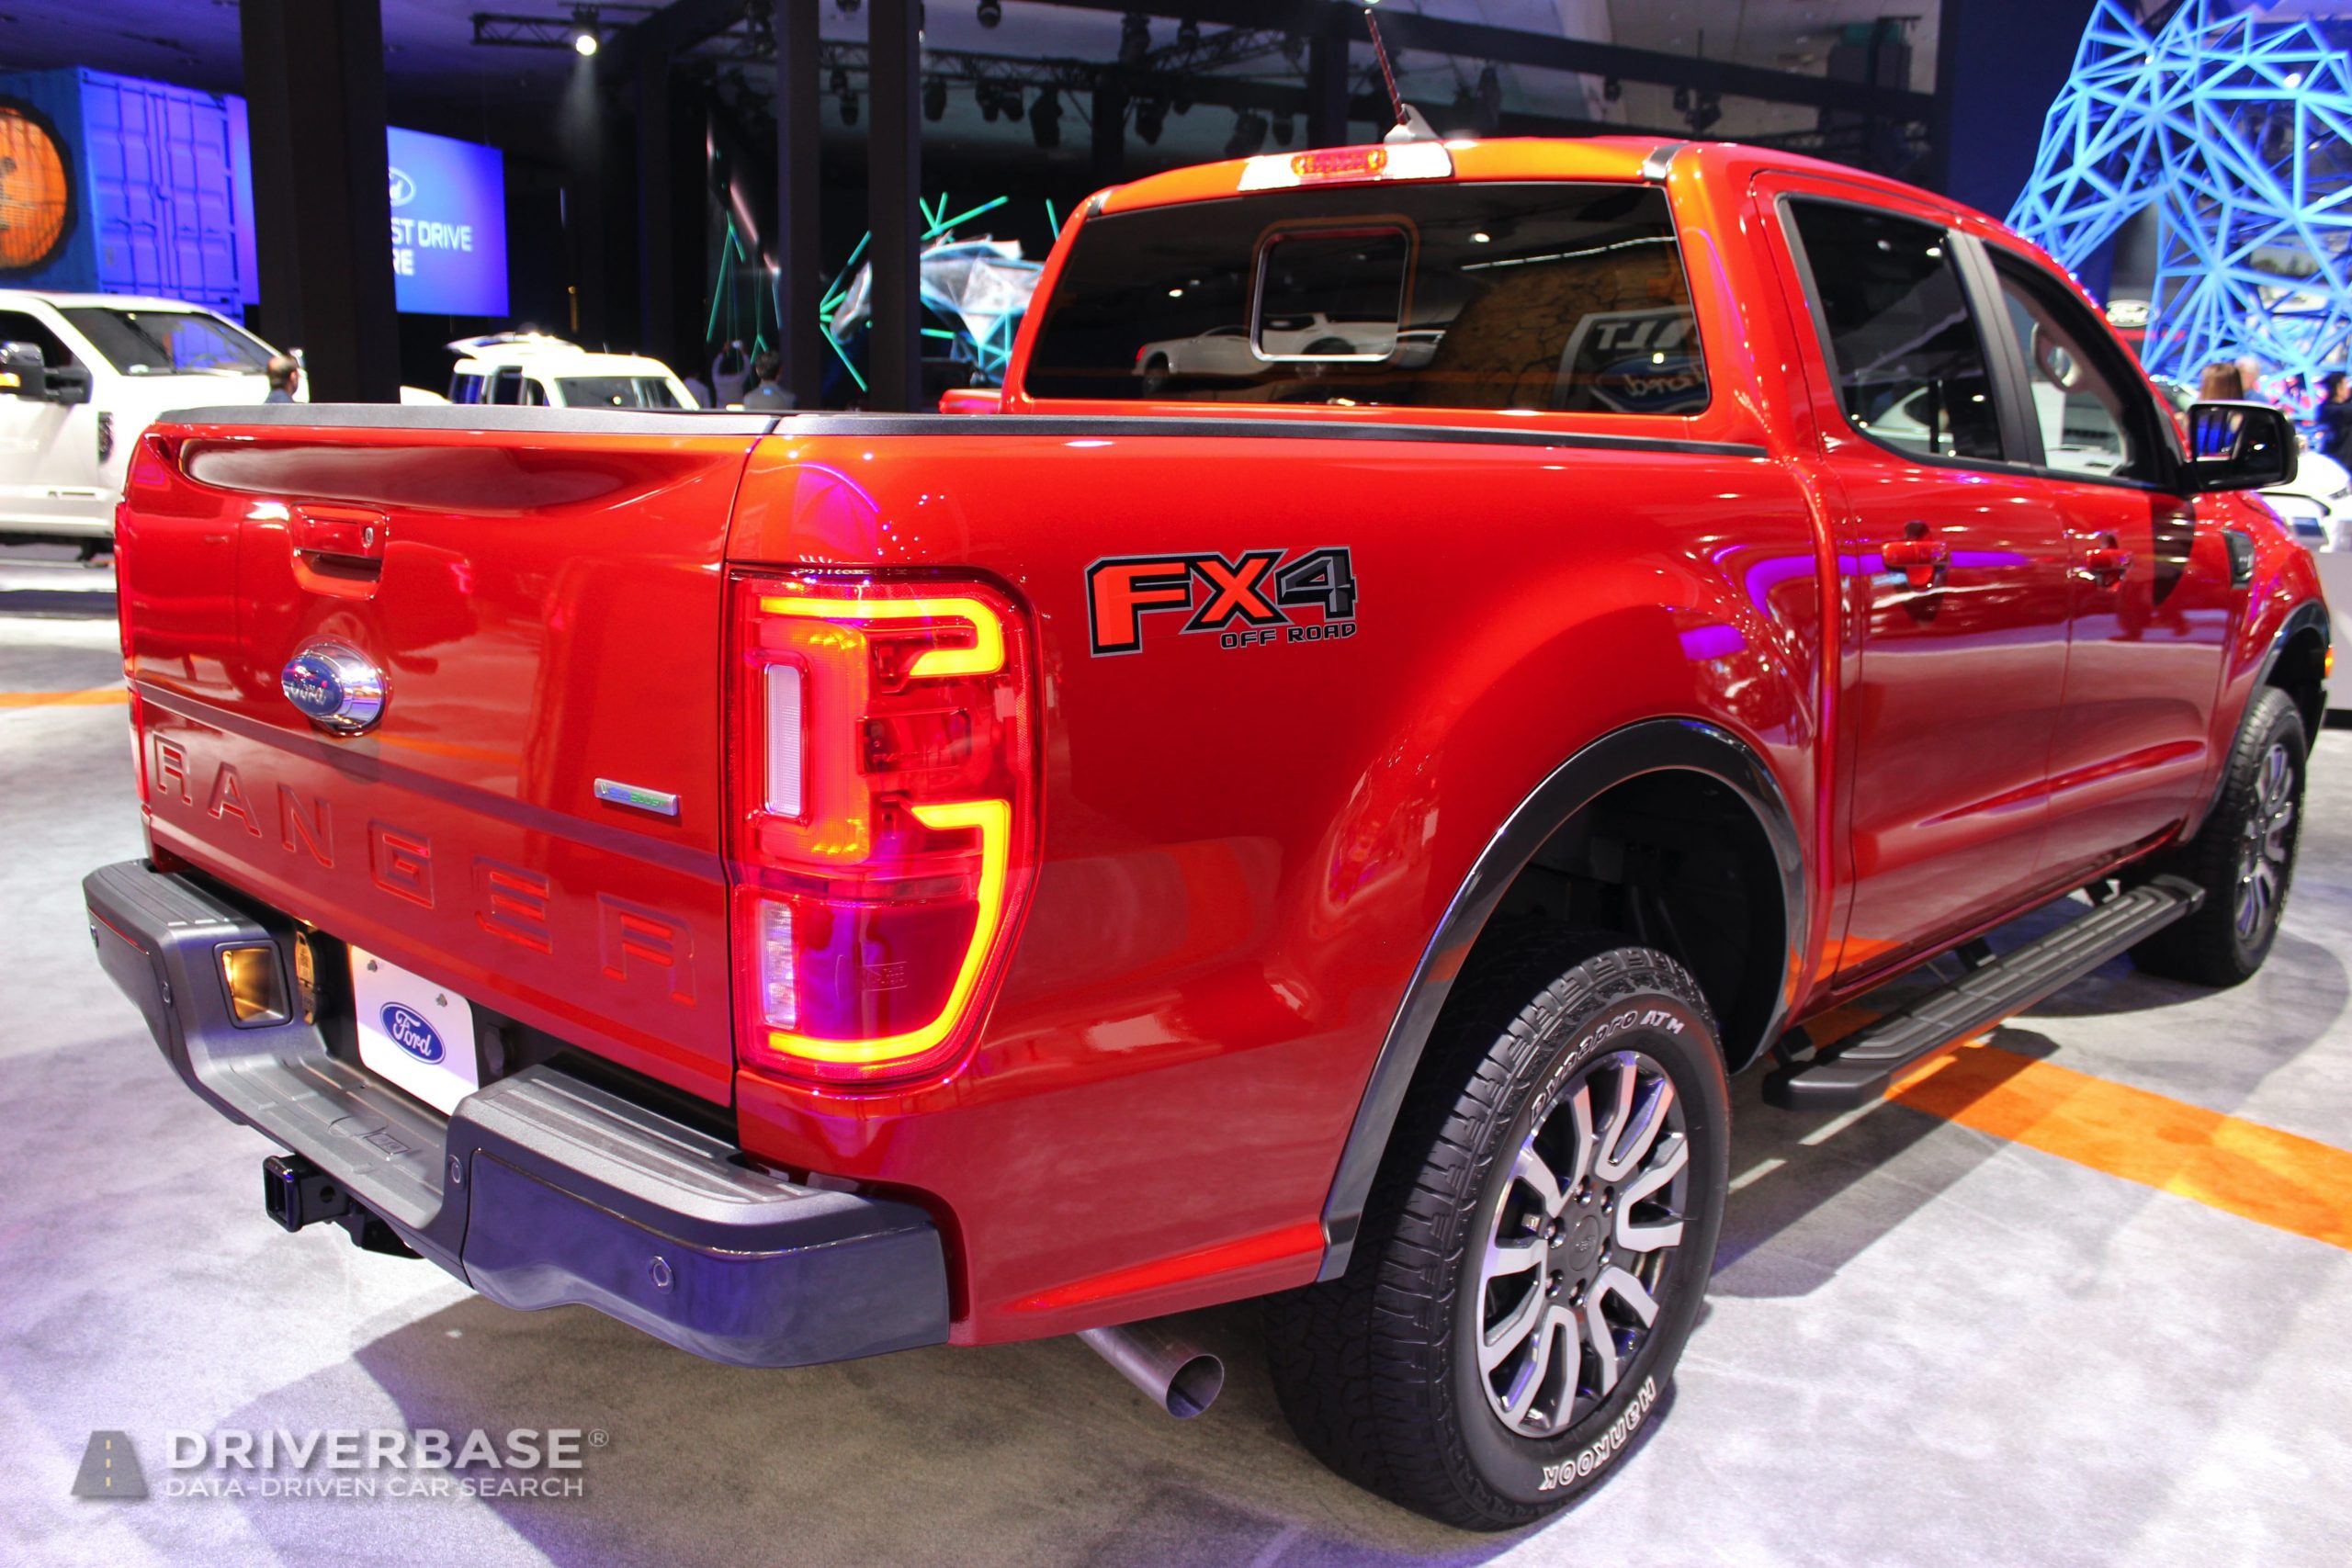 2020 Ford Ranger FX4 Off Road at the 2019 Los Angeles Auto Show